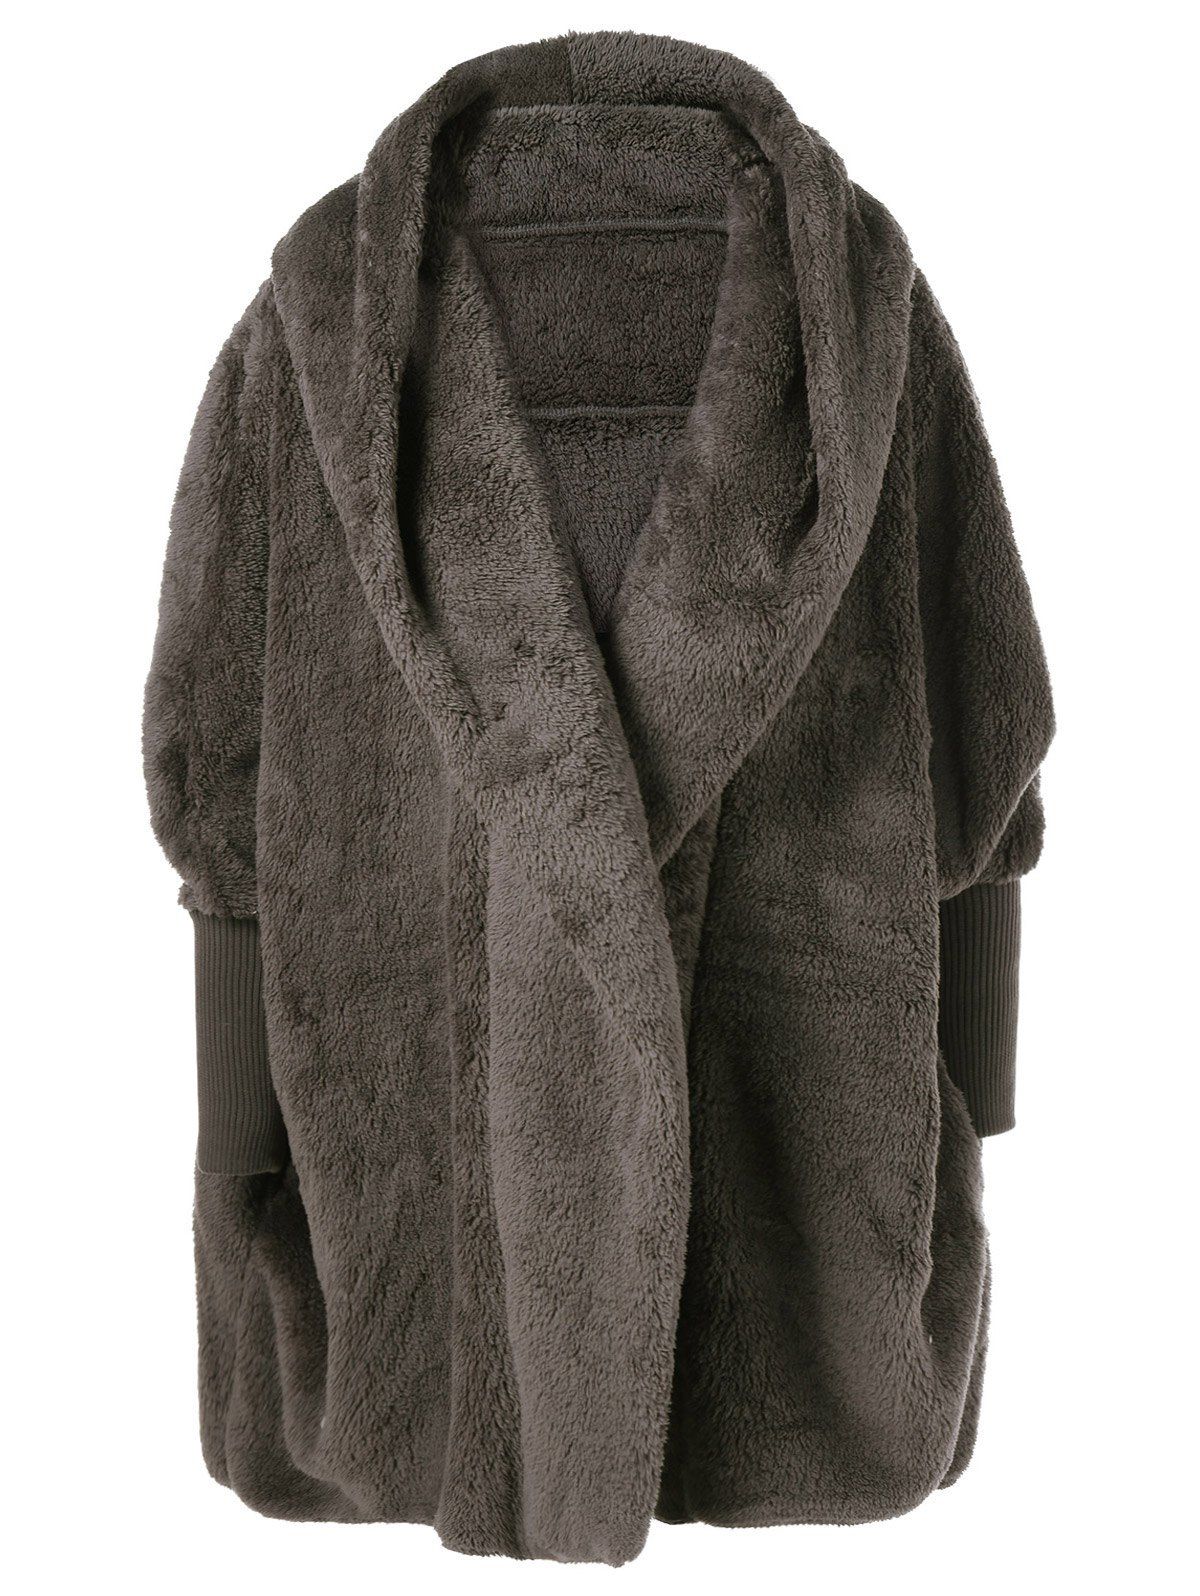 Fuzzy Hooded Coat - BROWN ONE SIZE